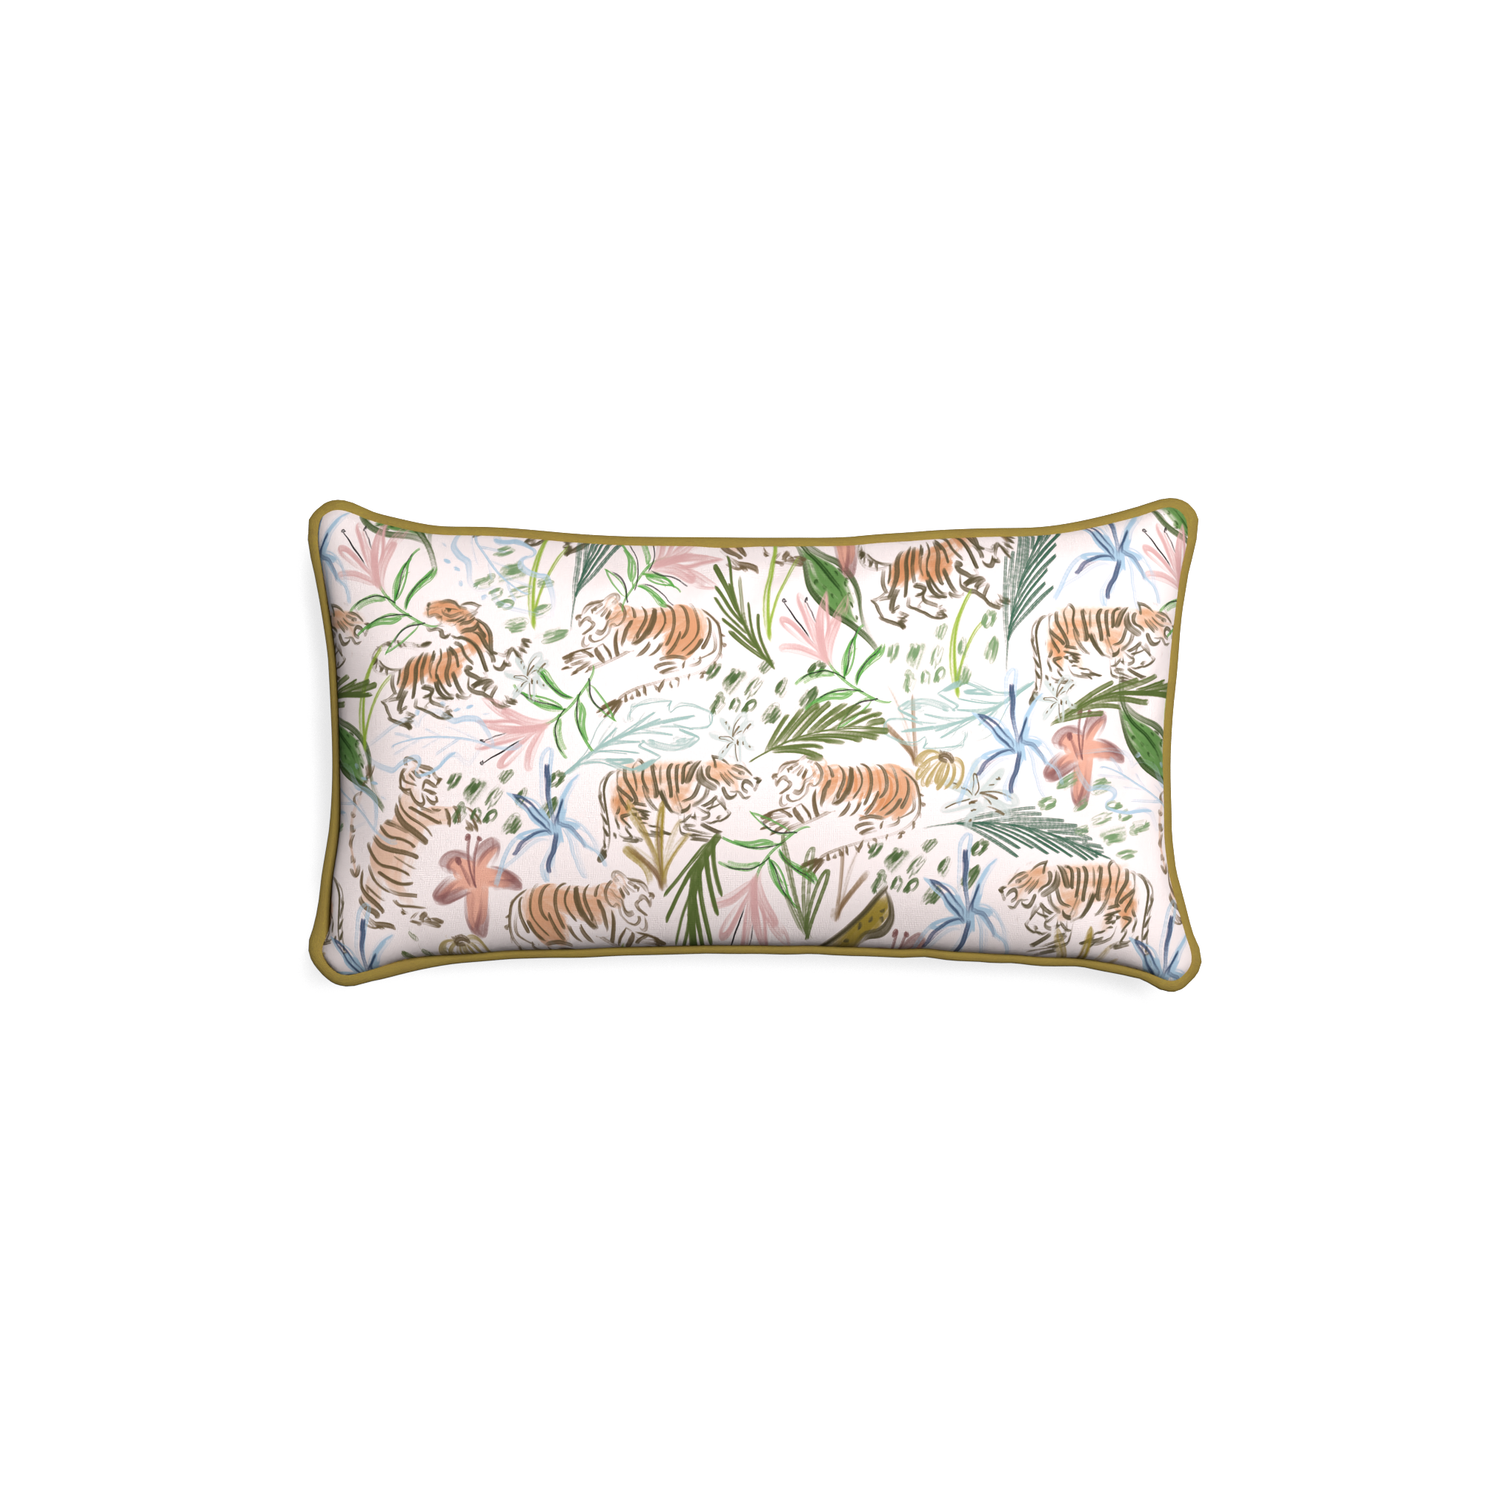 Petite-lumbar frida pink custom pink chinoiserie tigerpillow with c piping on white background